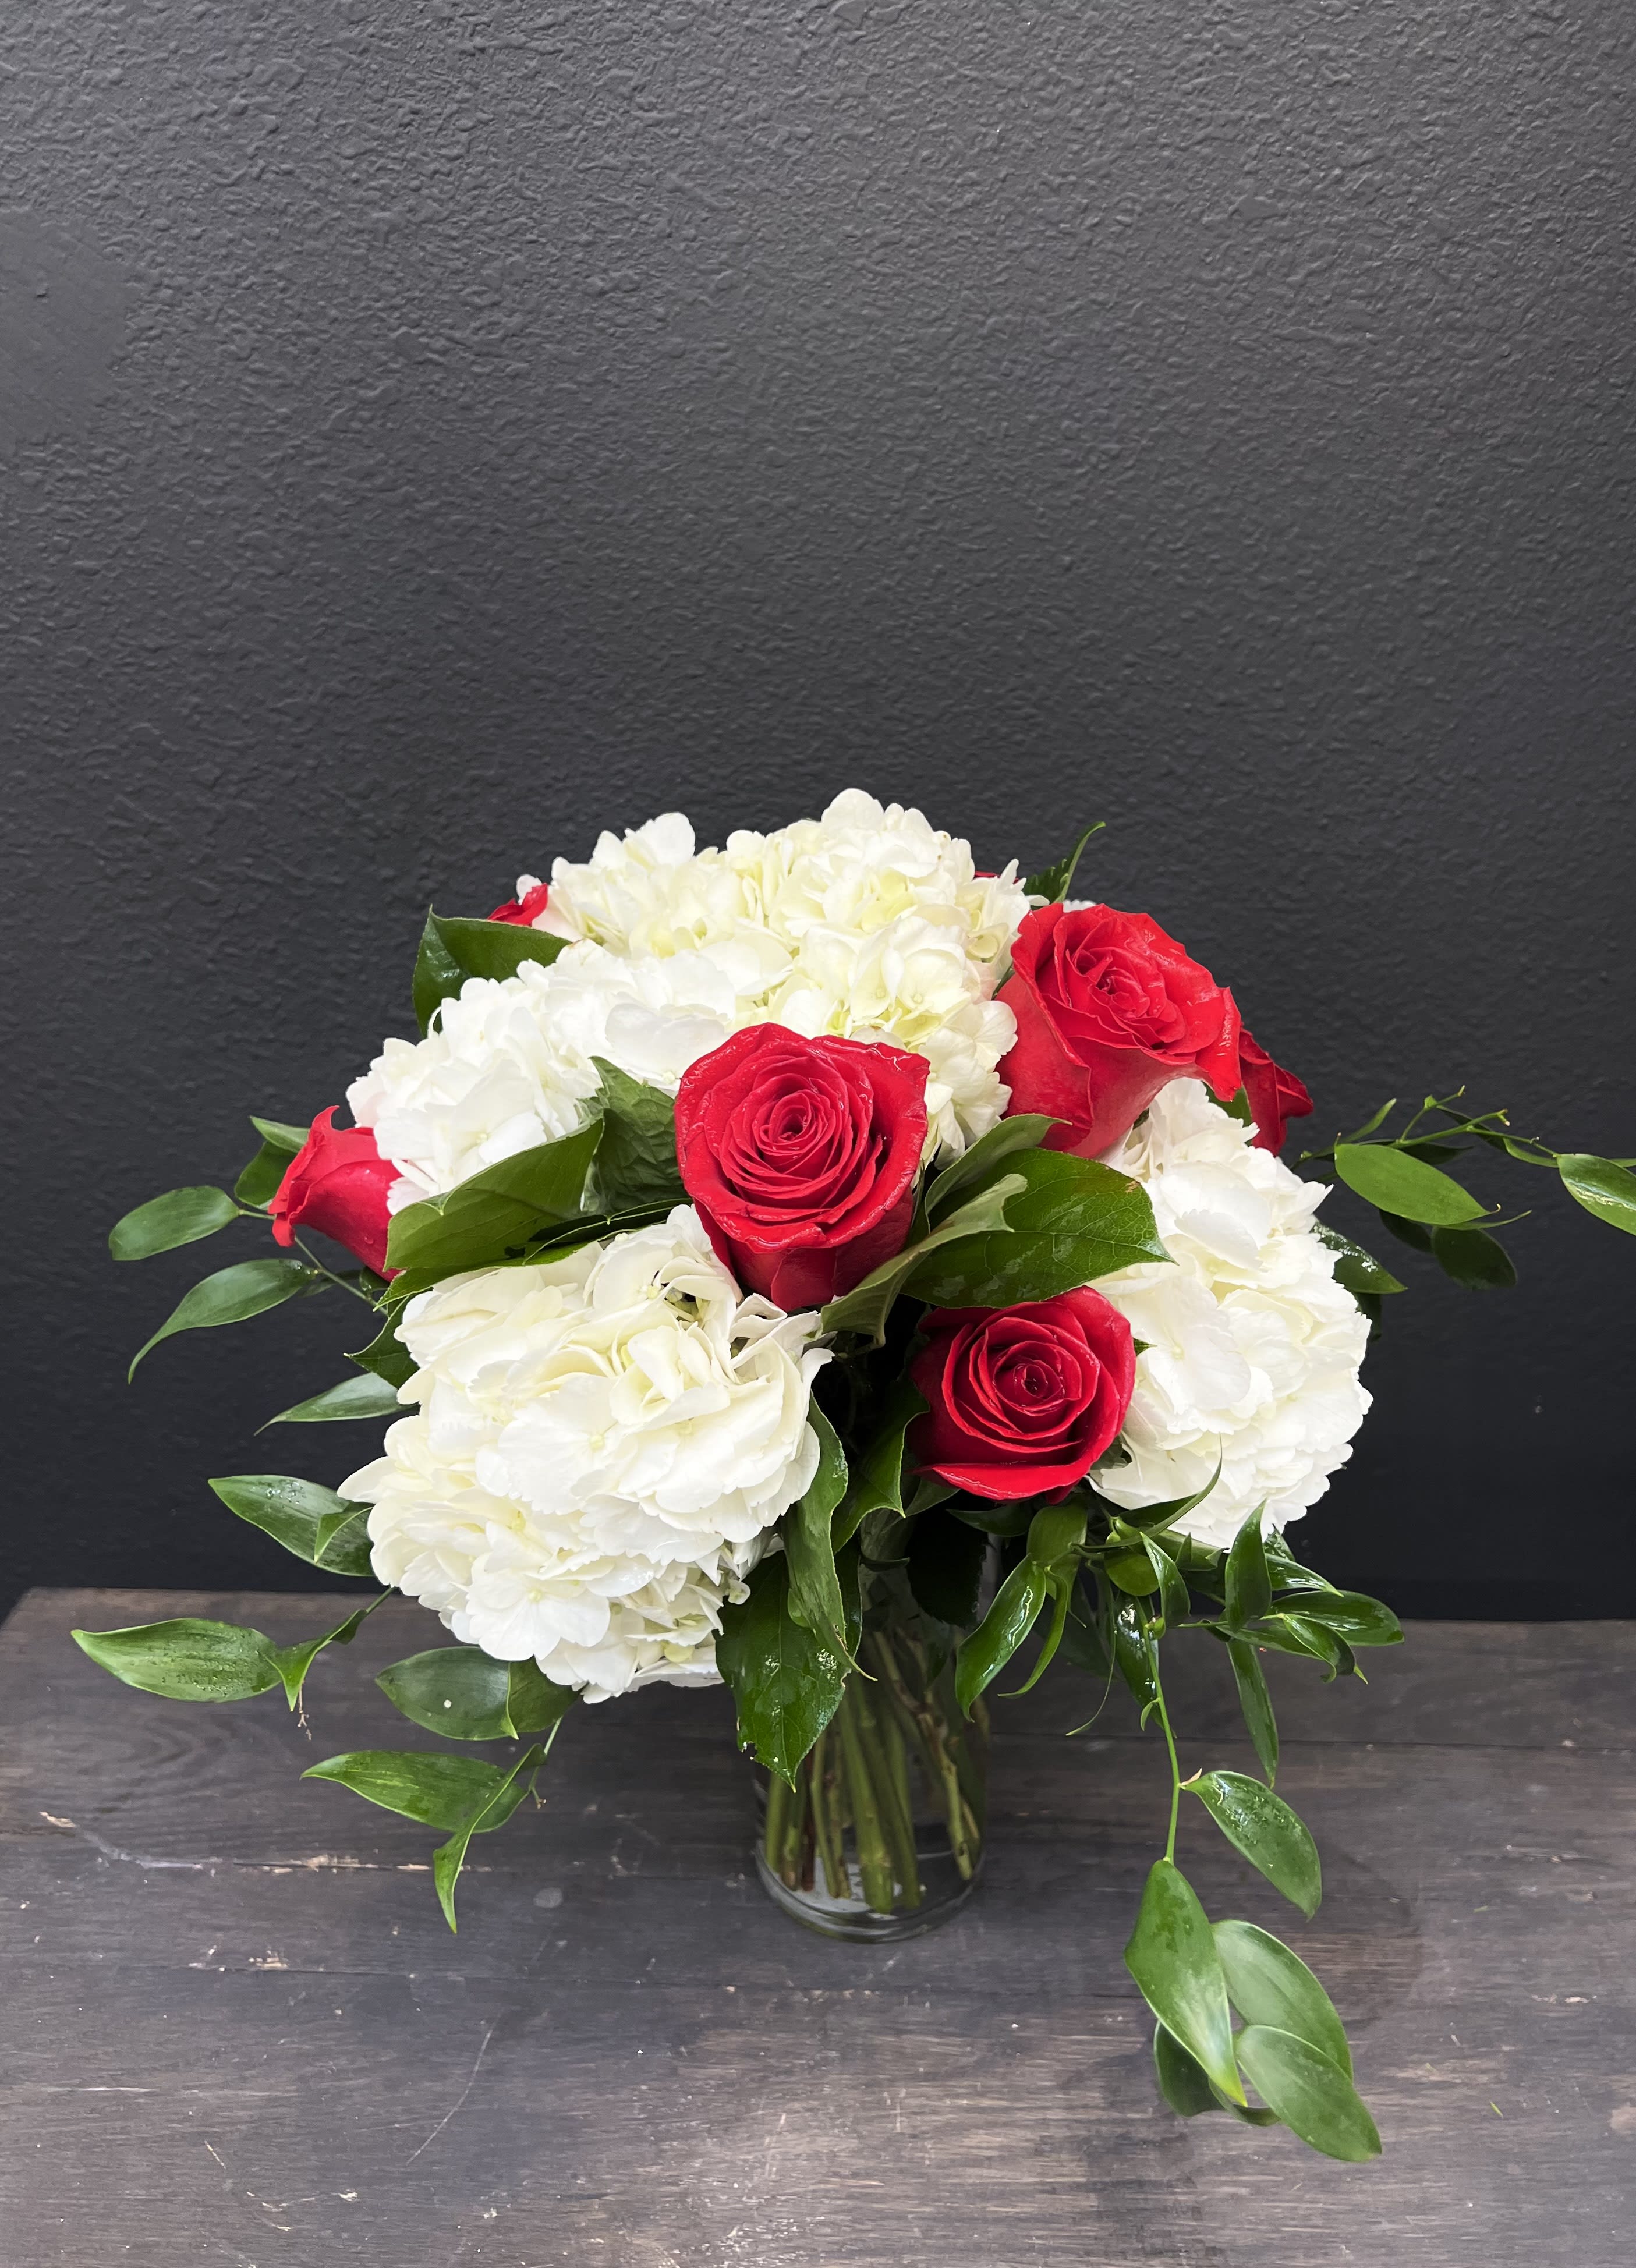 Lasting Love - Timeless and Classy! This European hand tied design could be carried down the isle!! White hydrangea and hot pink roses!! Doesn't get more timeless than this.